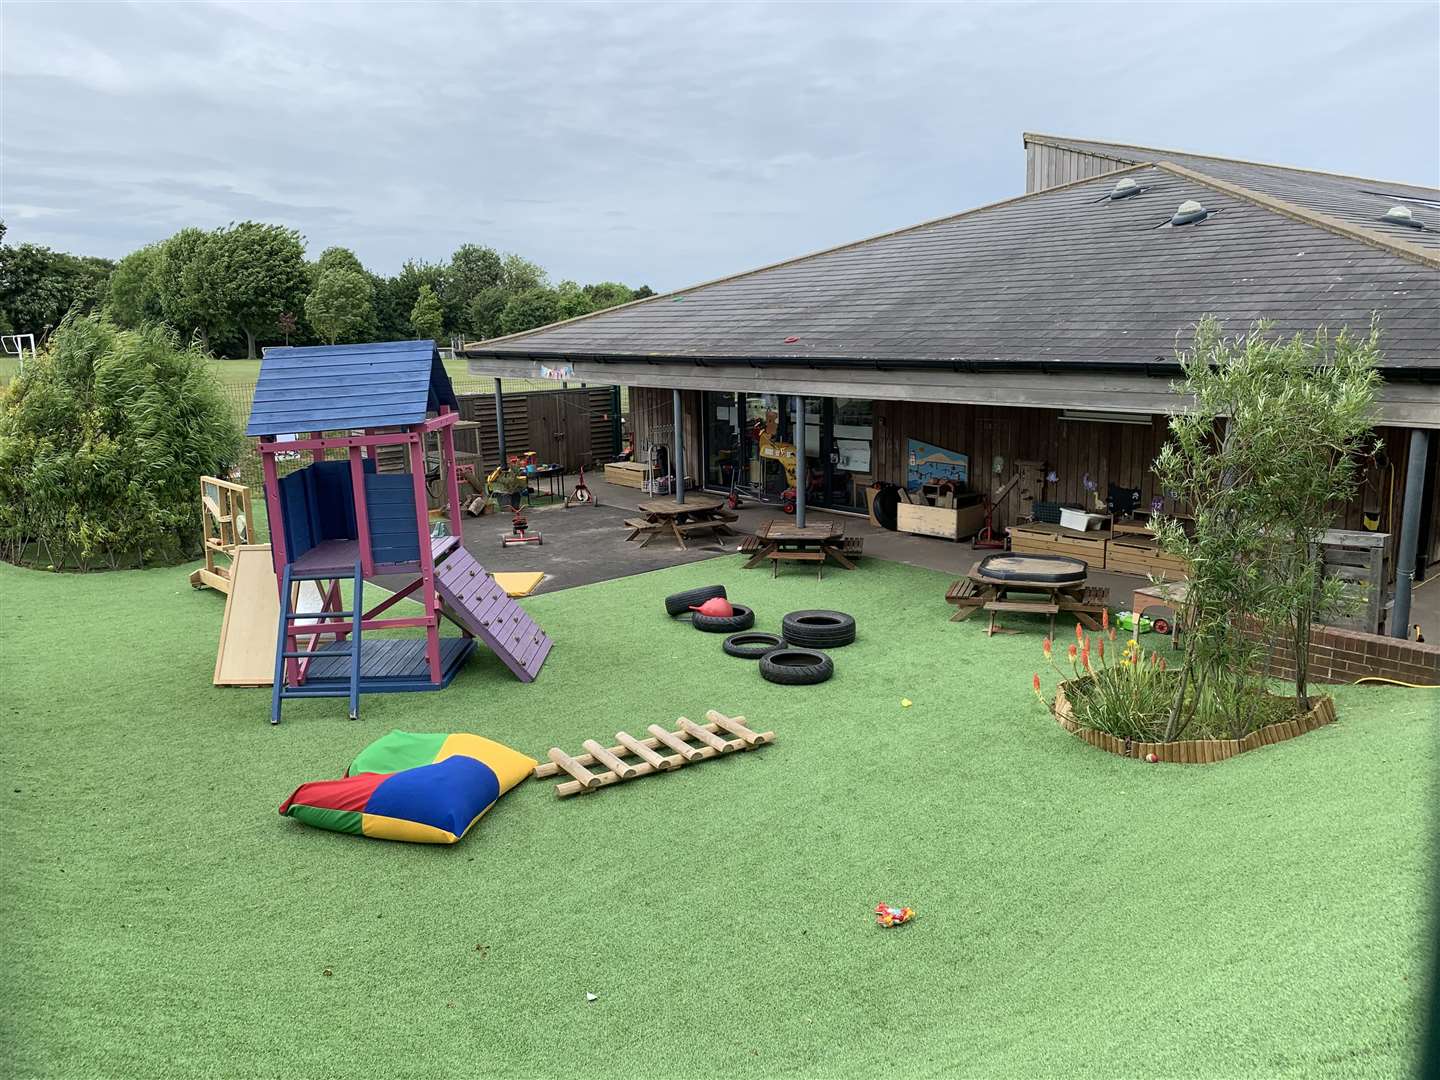 Brambles Nursery couldn't afford to replace its outdoor play equipment